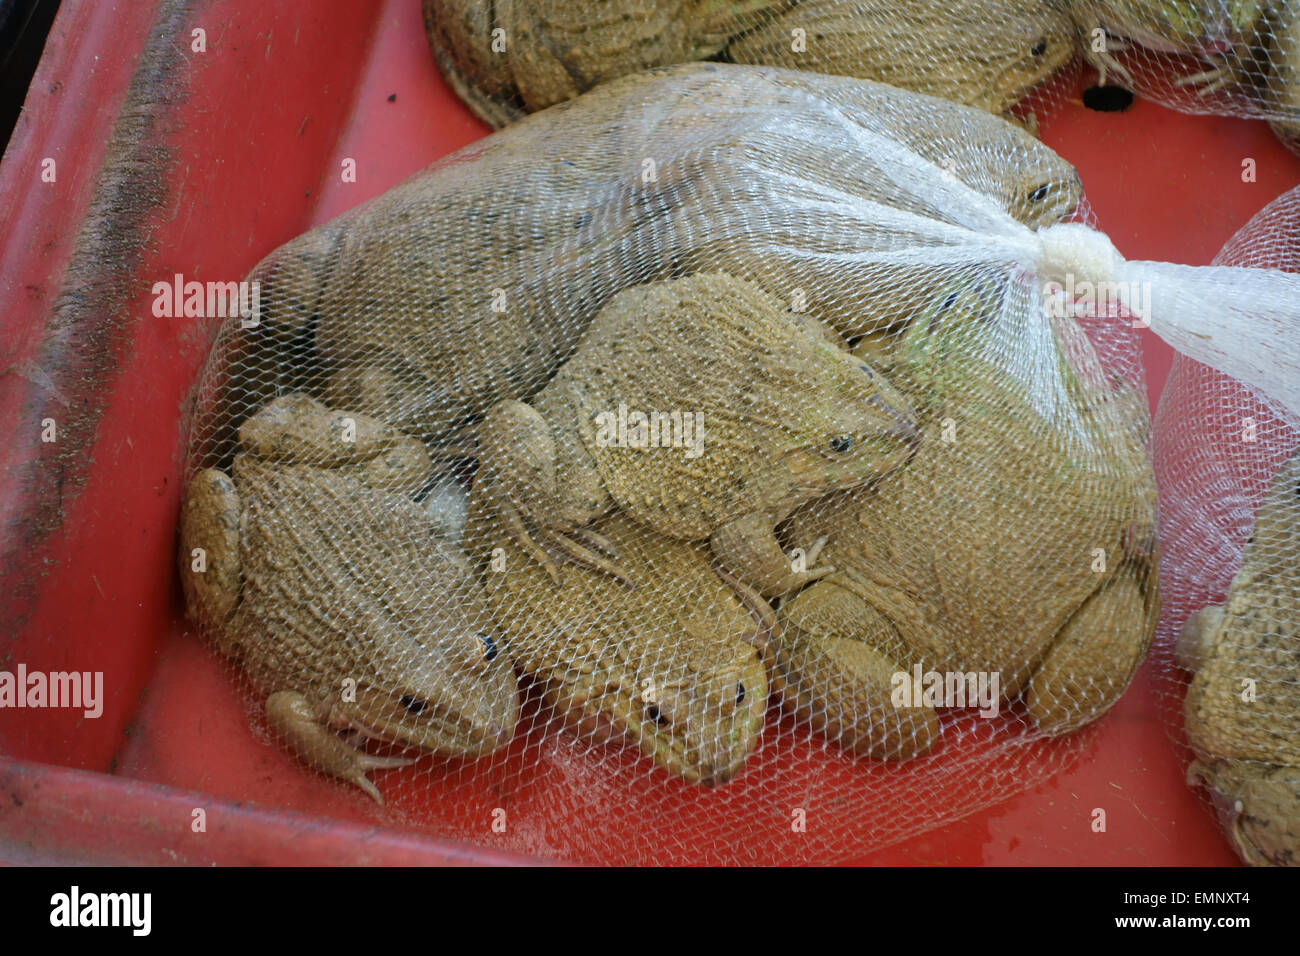 Chinese edible frogs, Hoplobatrachus rugulosus, living amphibians in a net bag in a Bangkok market Stock Photo